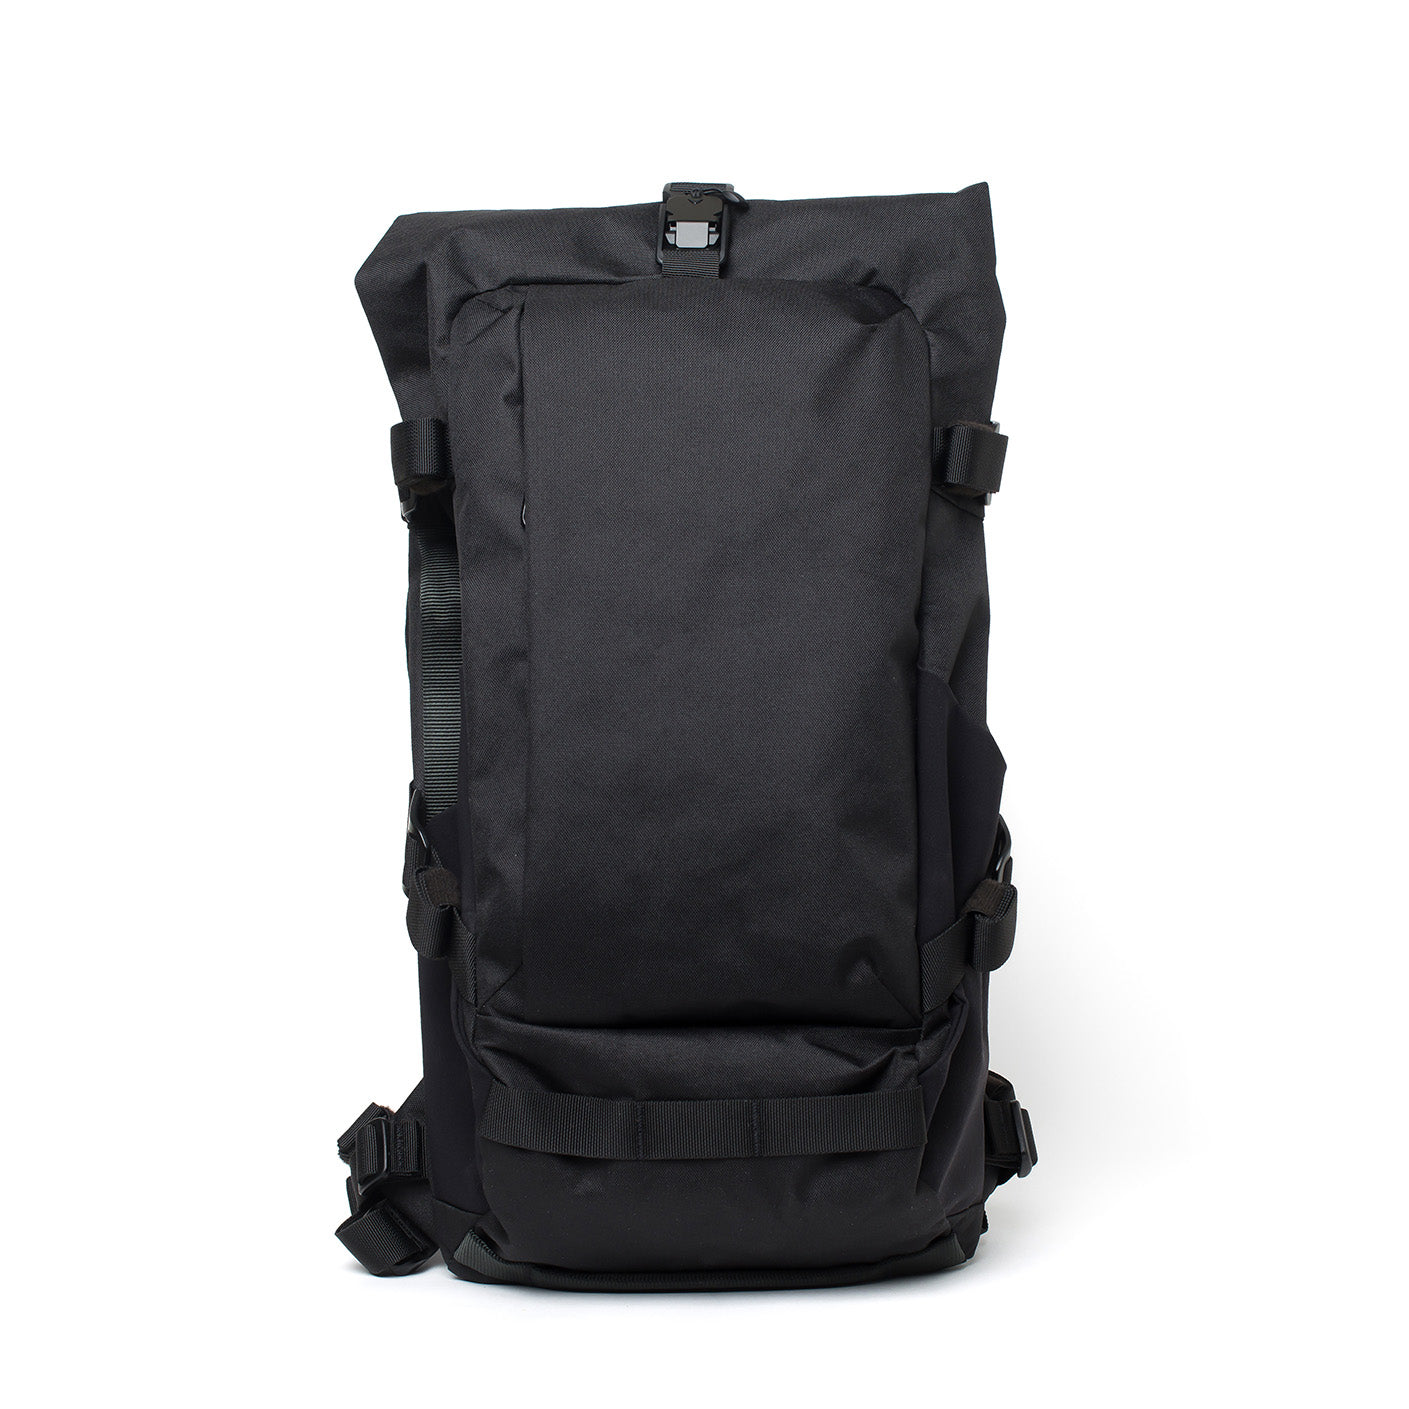 ATD2 Backpack - Black - Storming Gravity